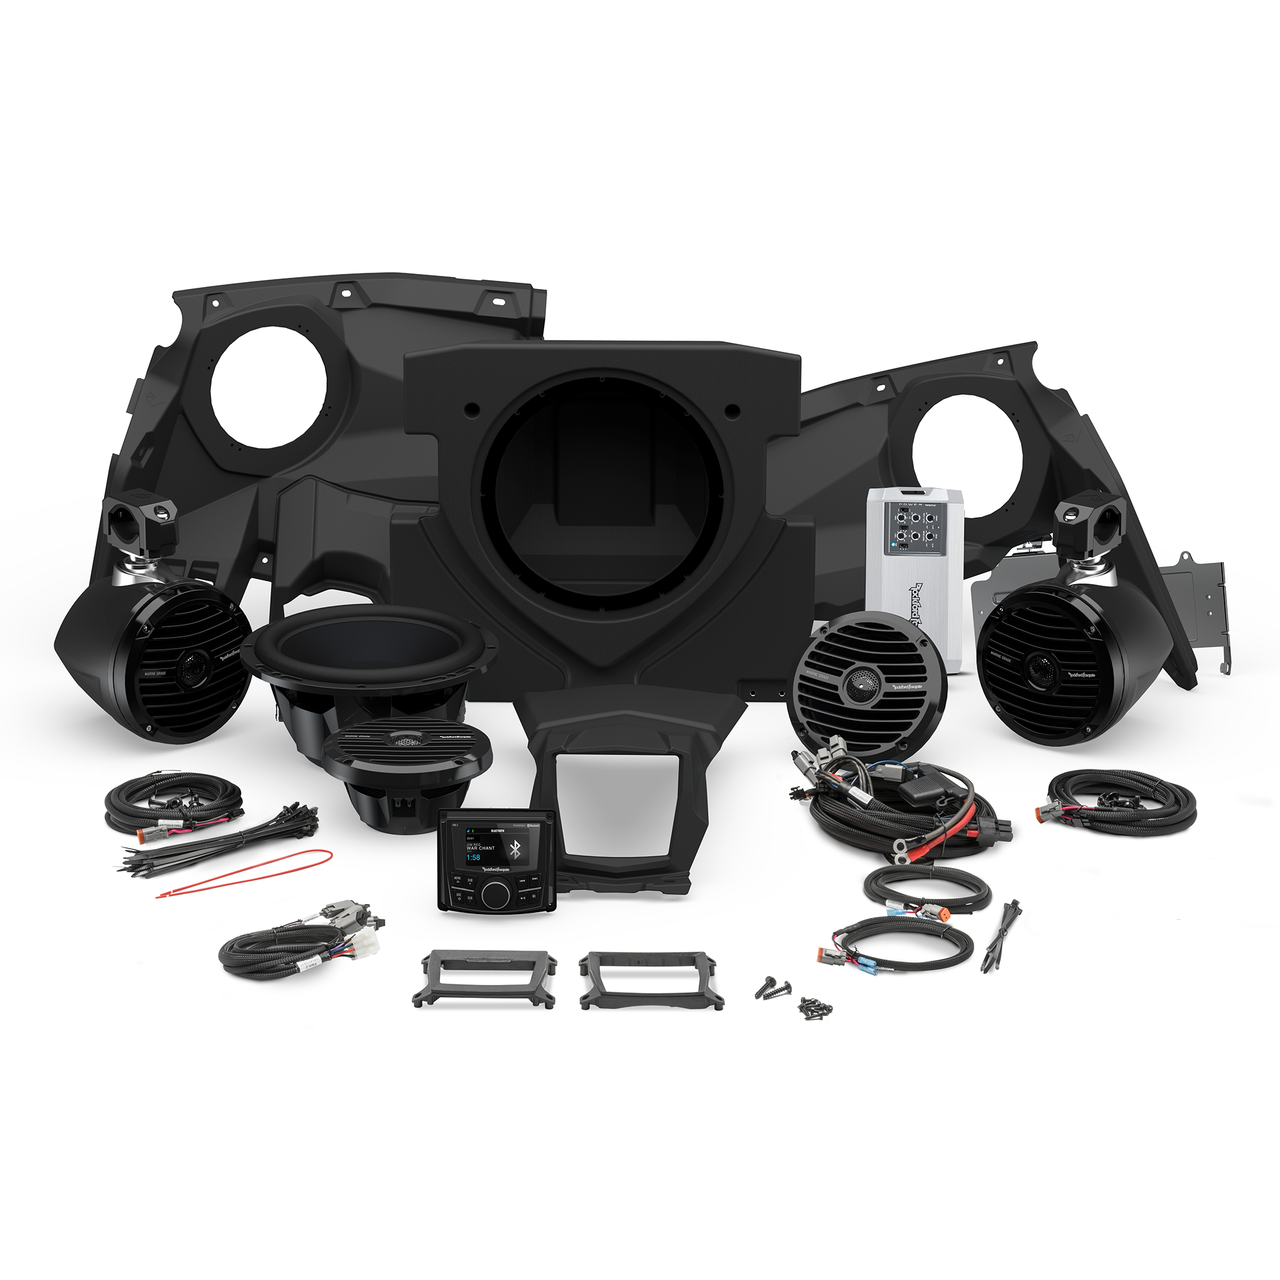 Complete Stereo Kits For The Can-Am Commander